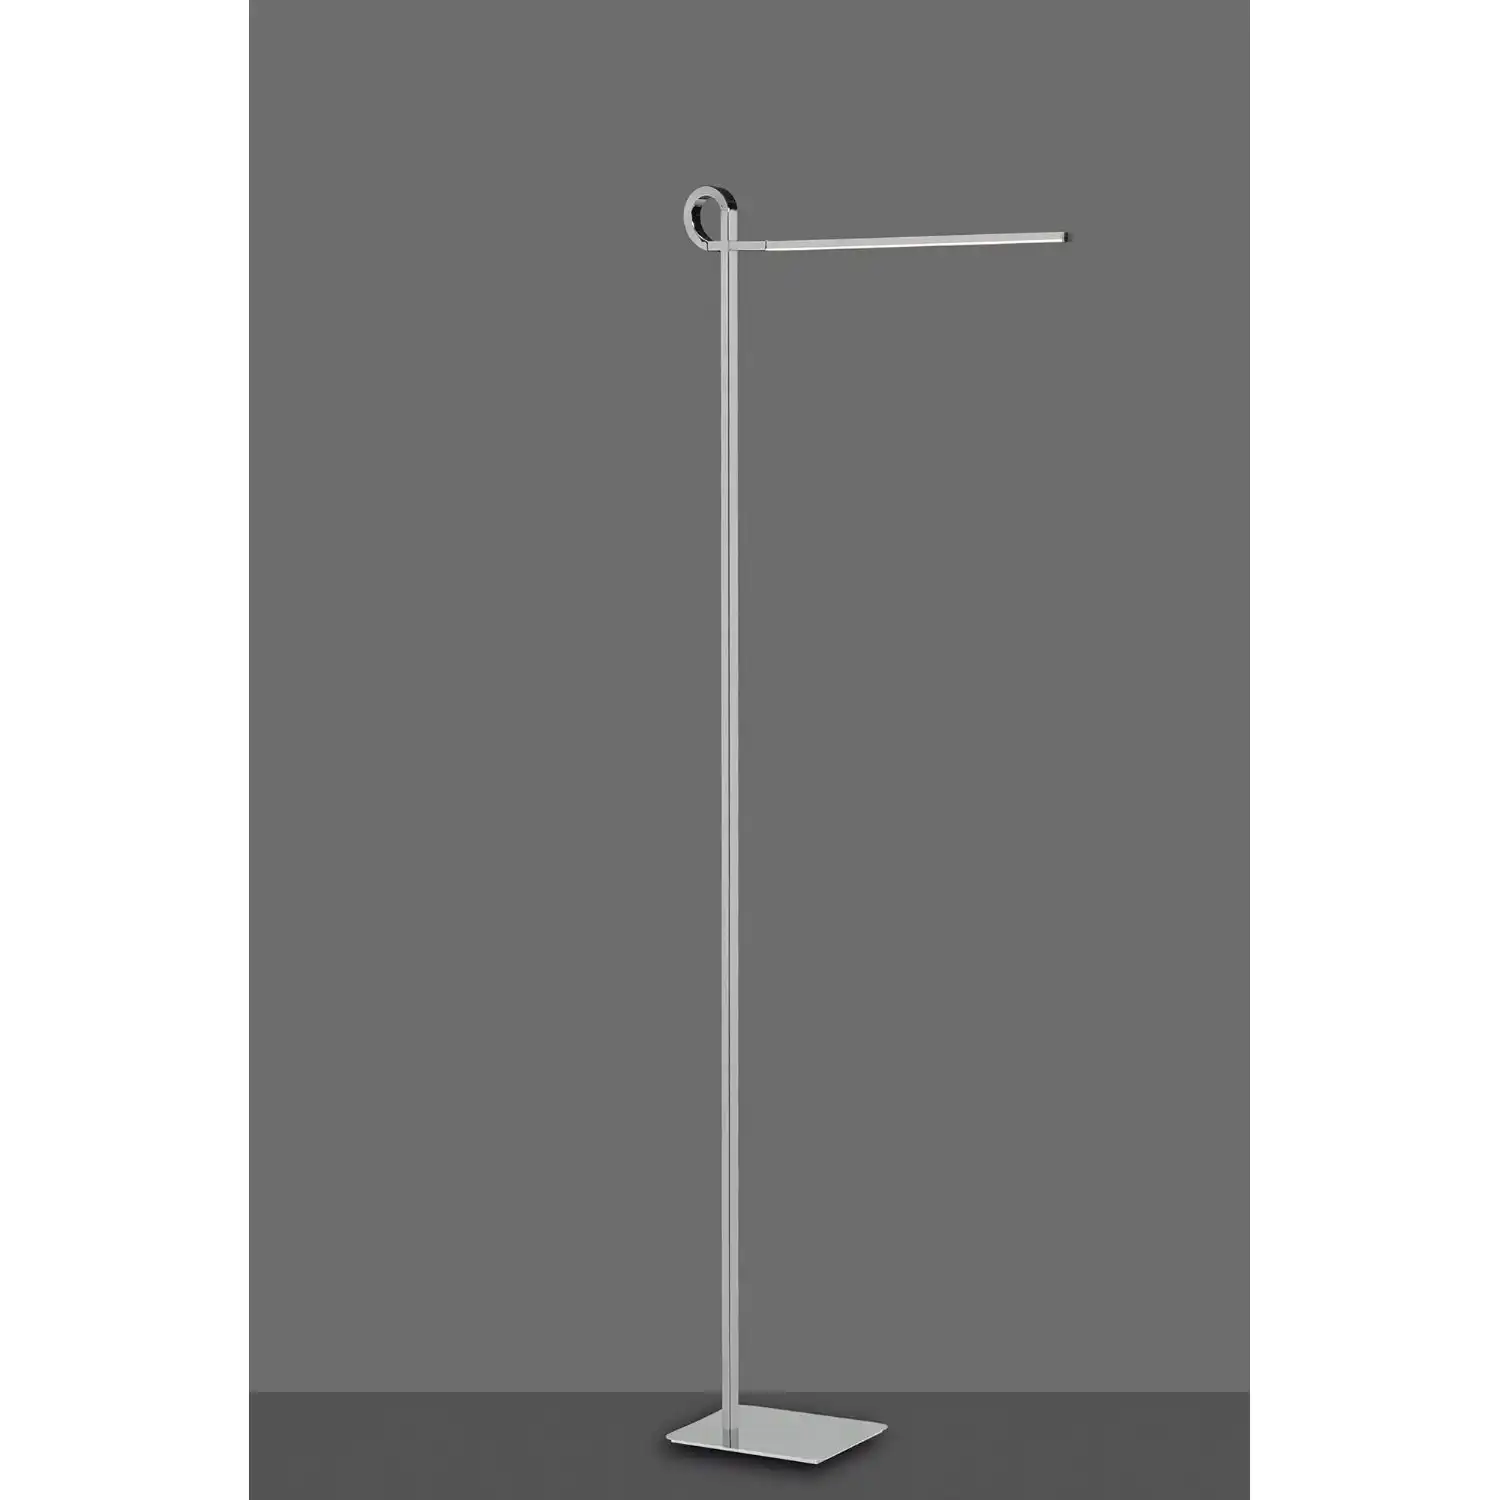 Cinto Floor Lamp 163cm, 7W LED, 3000K, 540lm Dimmable, Polished Chrome, 3yrs Warranty